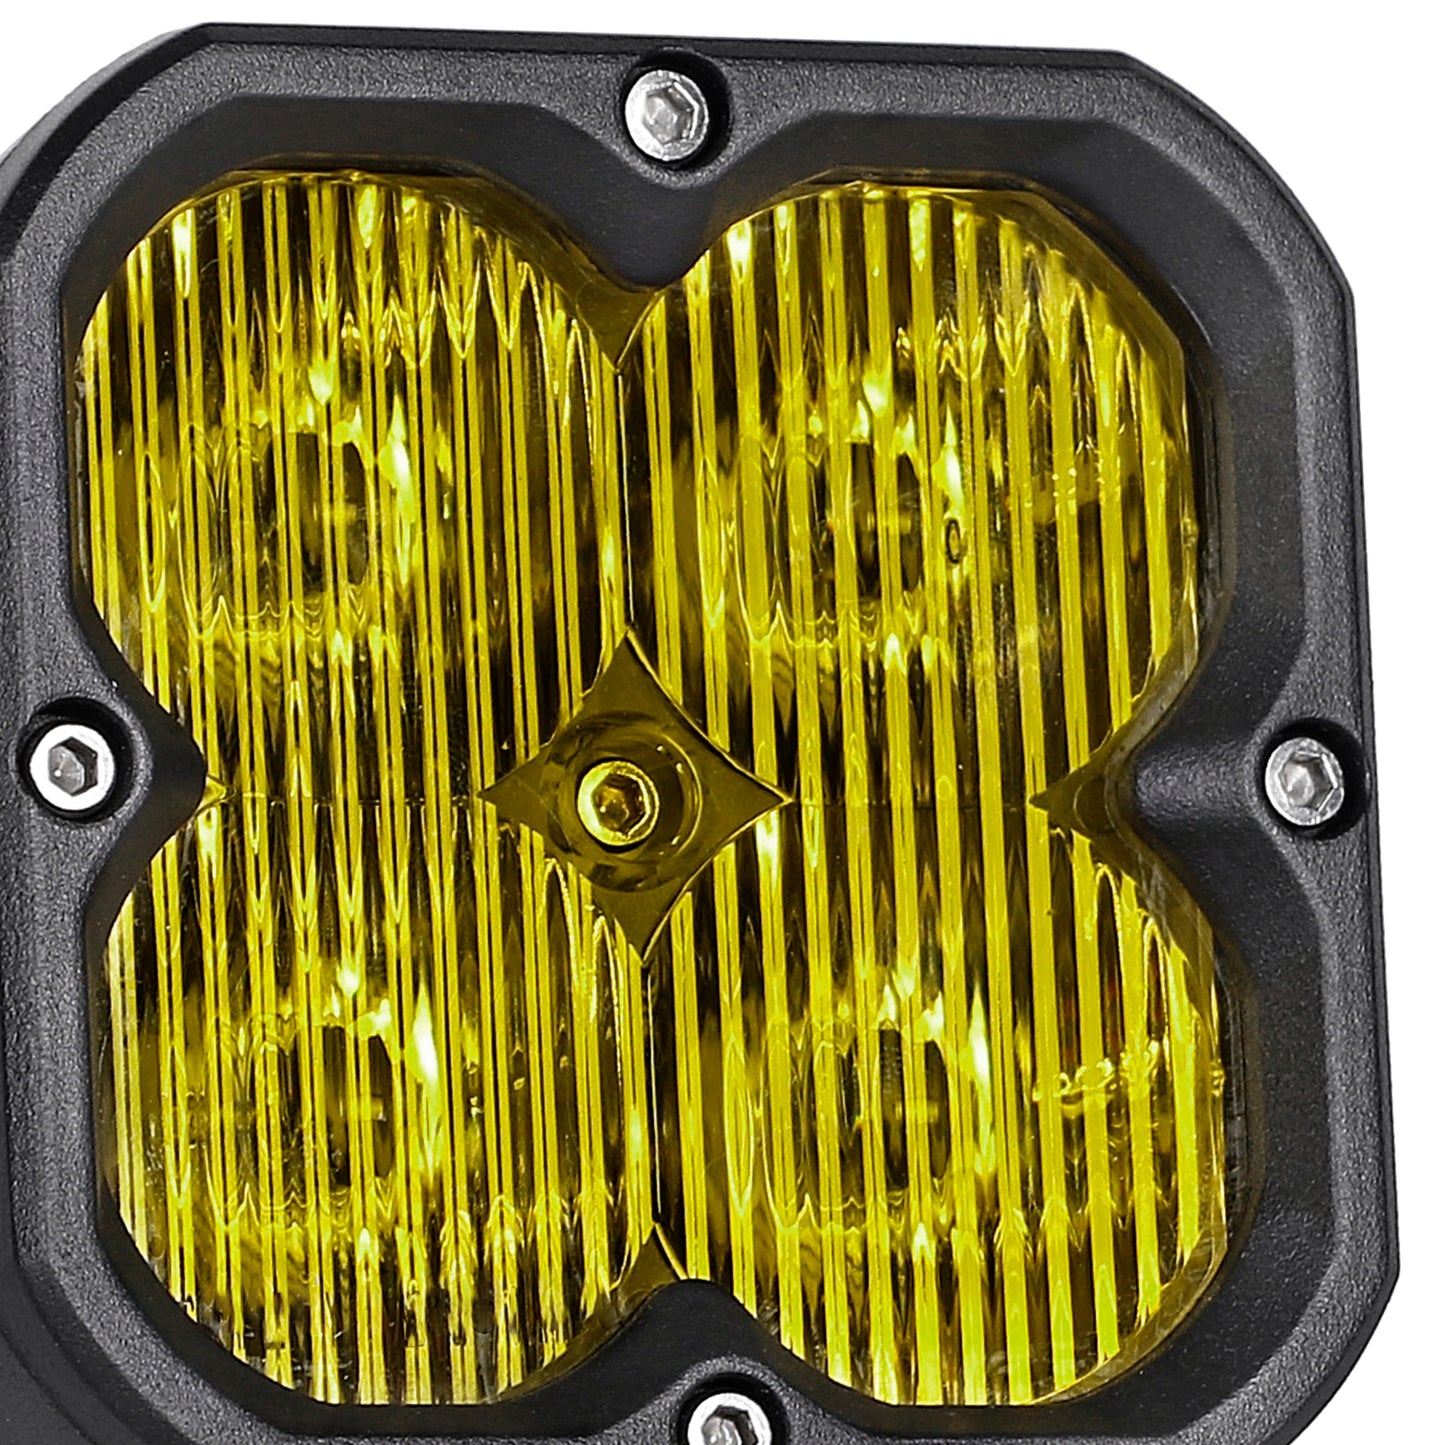 Orion 3" Square Yellow Driving Light Pair with Amber Backlight